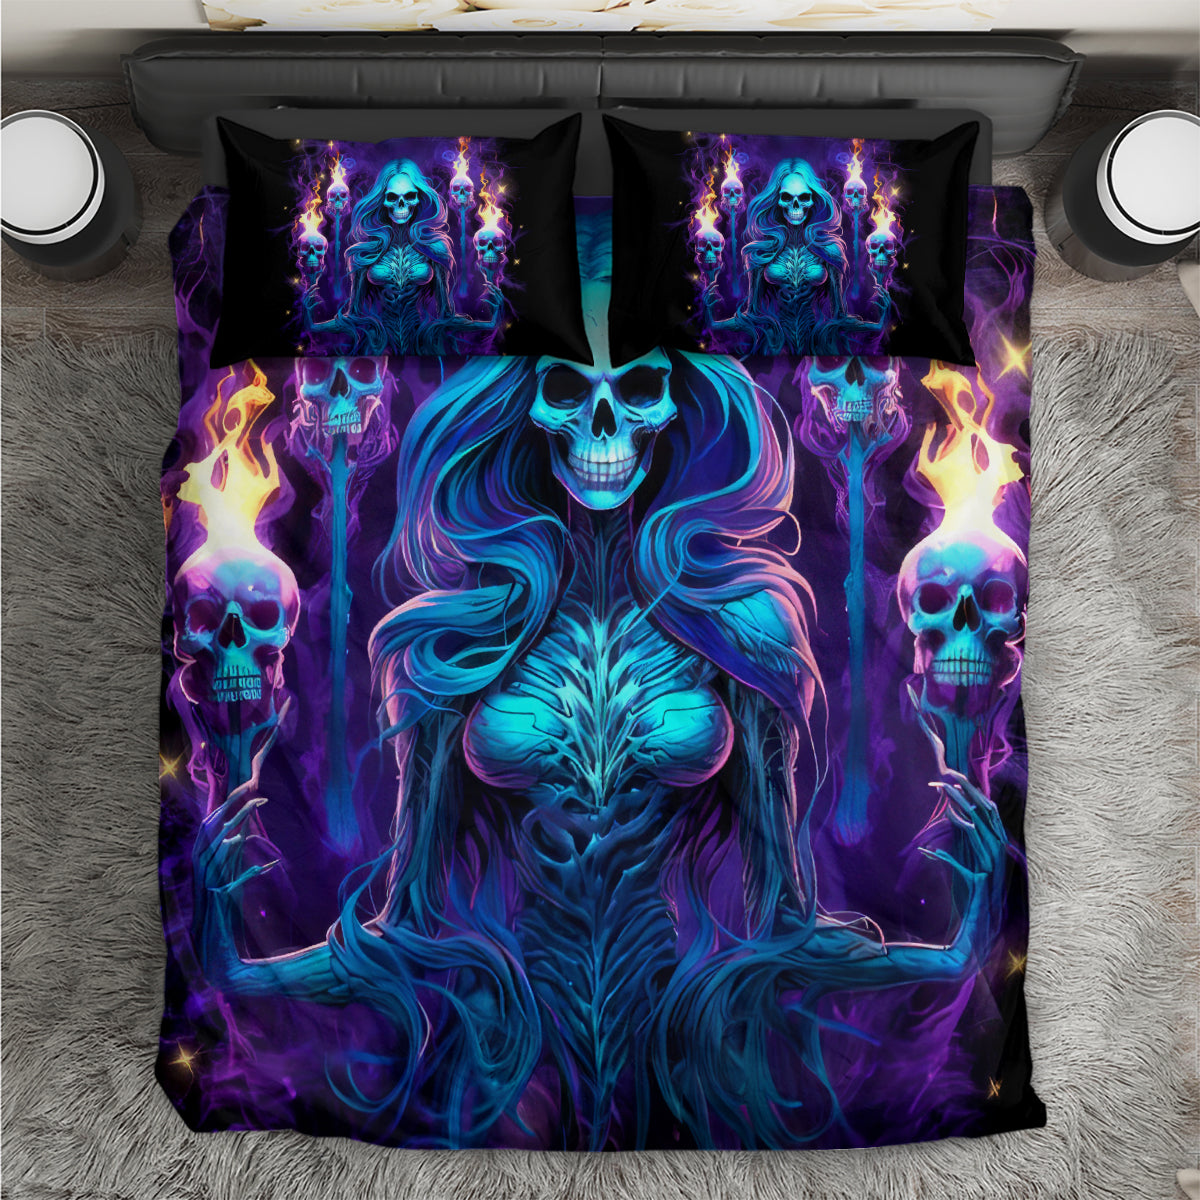 Witch Skull Bedding Set Wake Up Beasuty I't Time To Beast